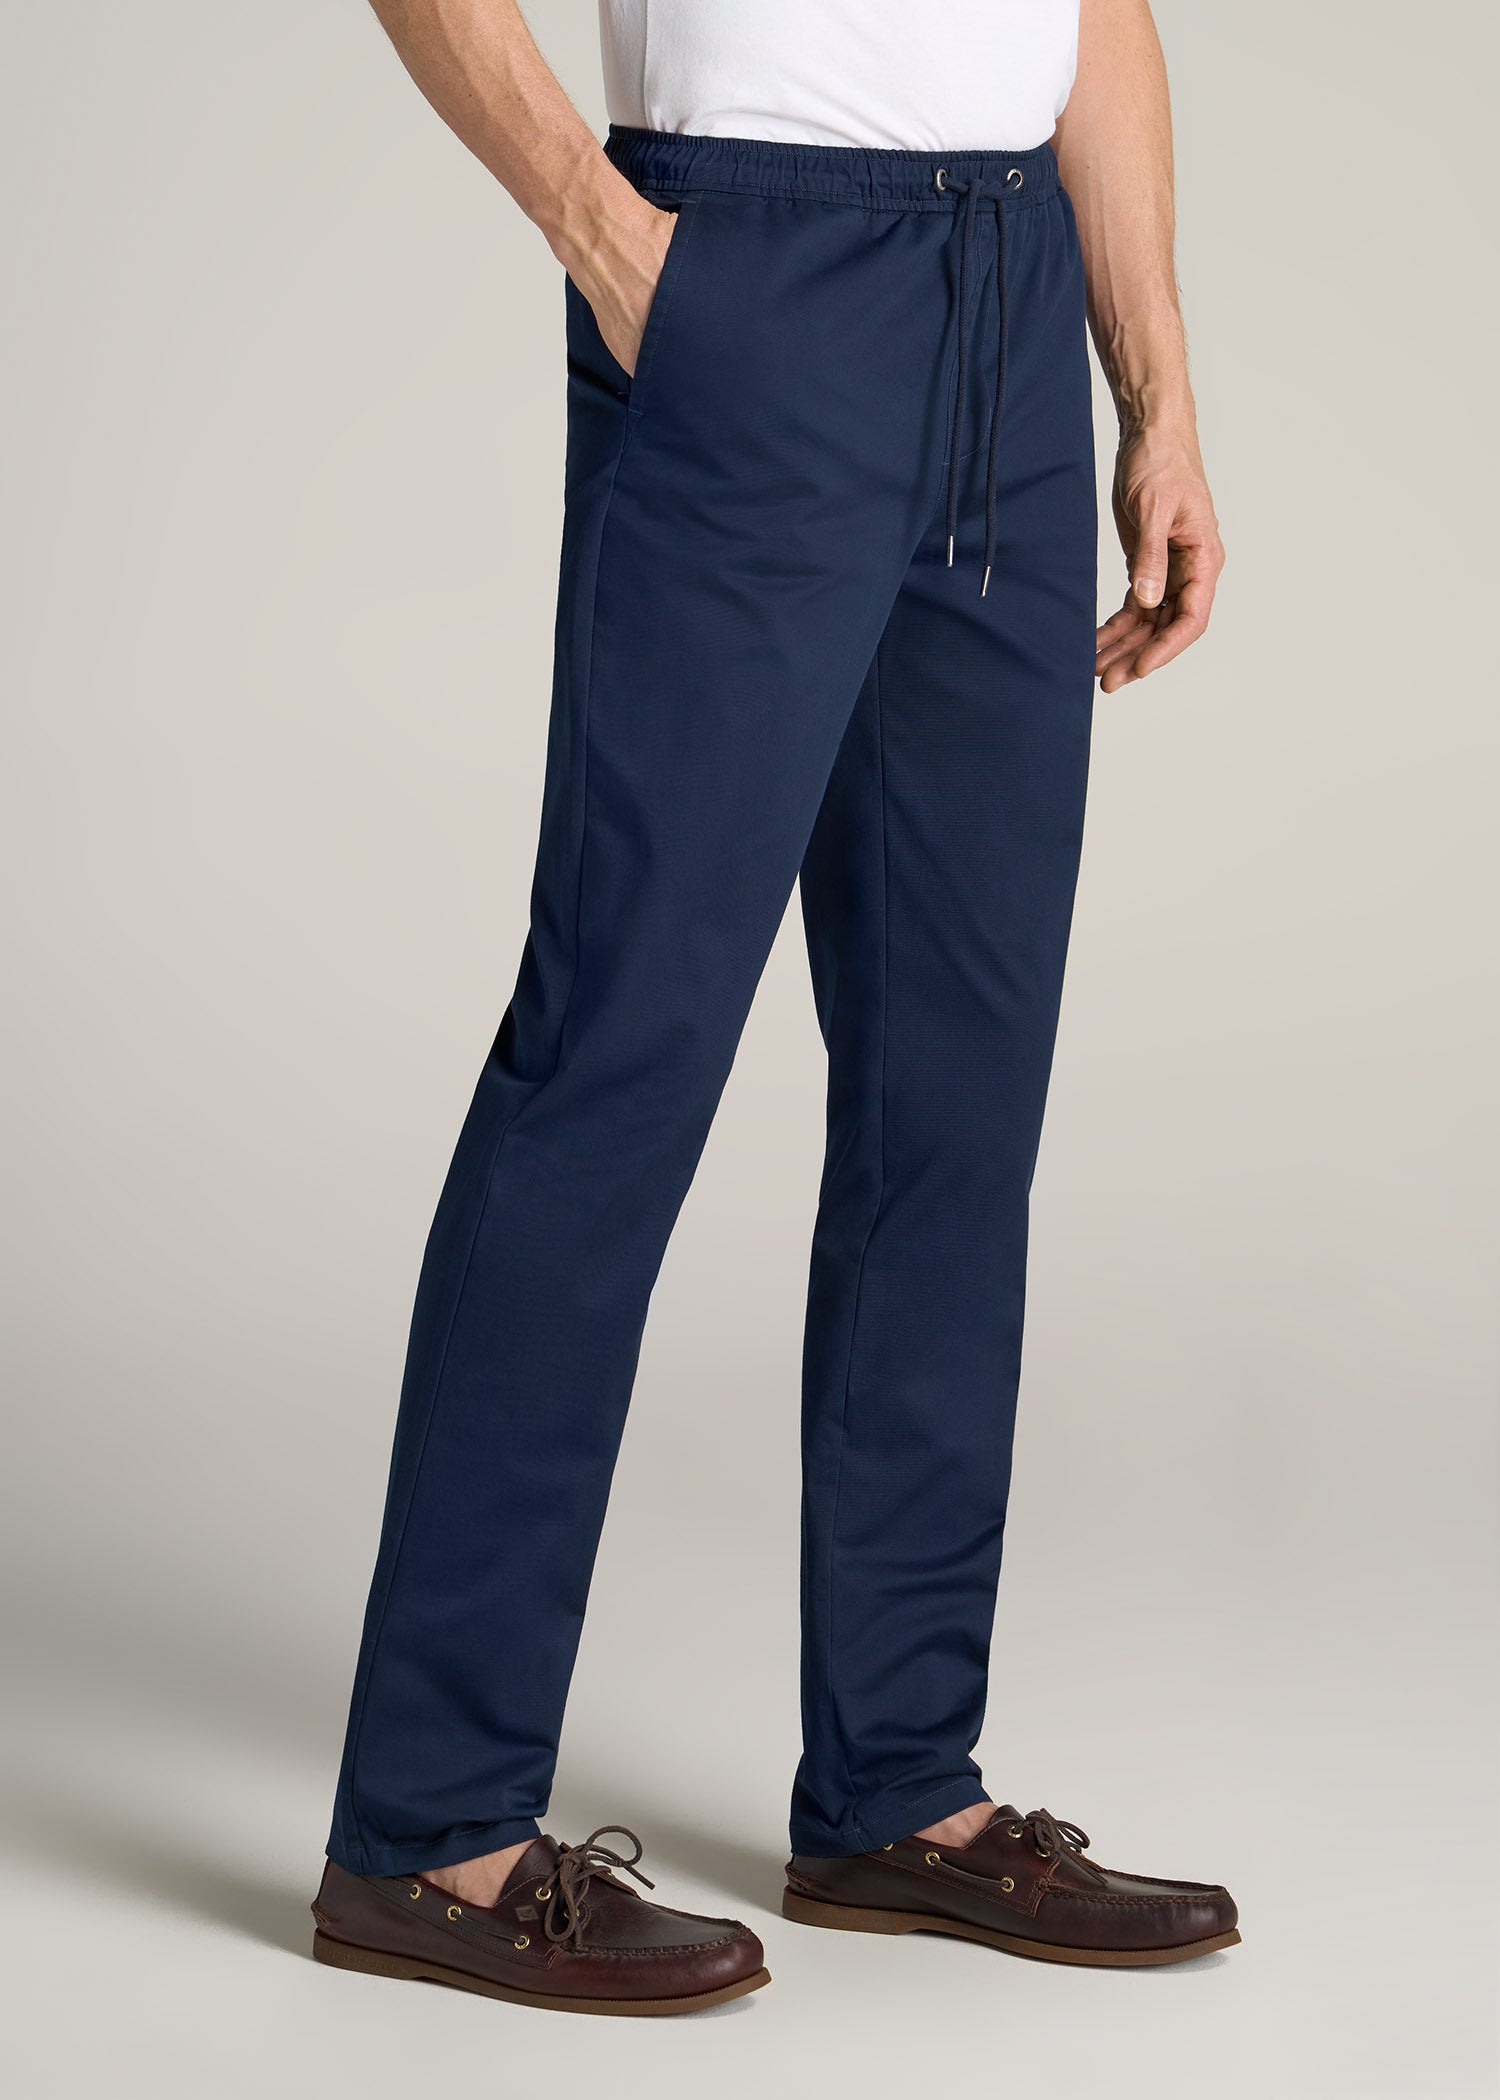 Stretch Dress Pants for Tall Men